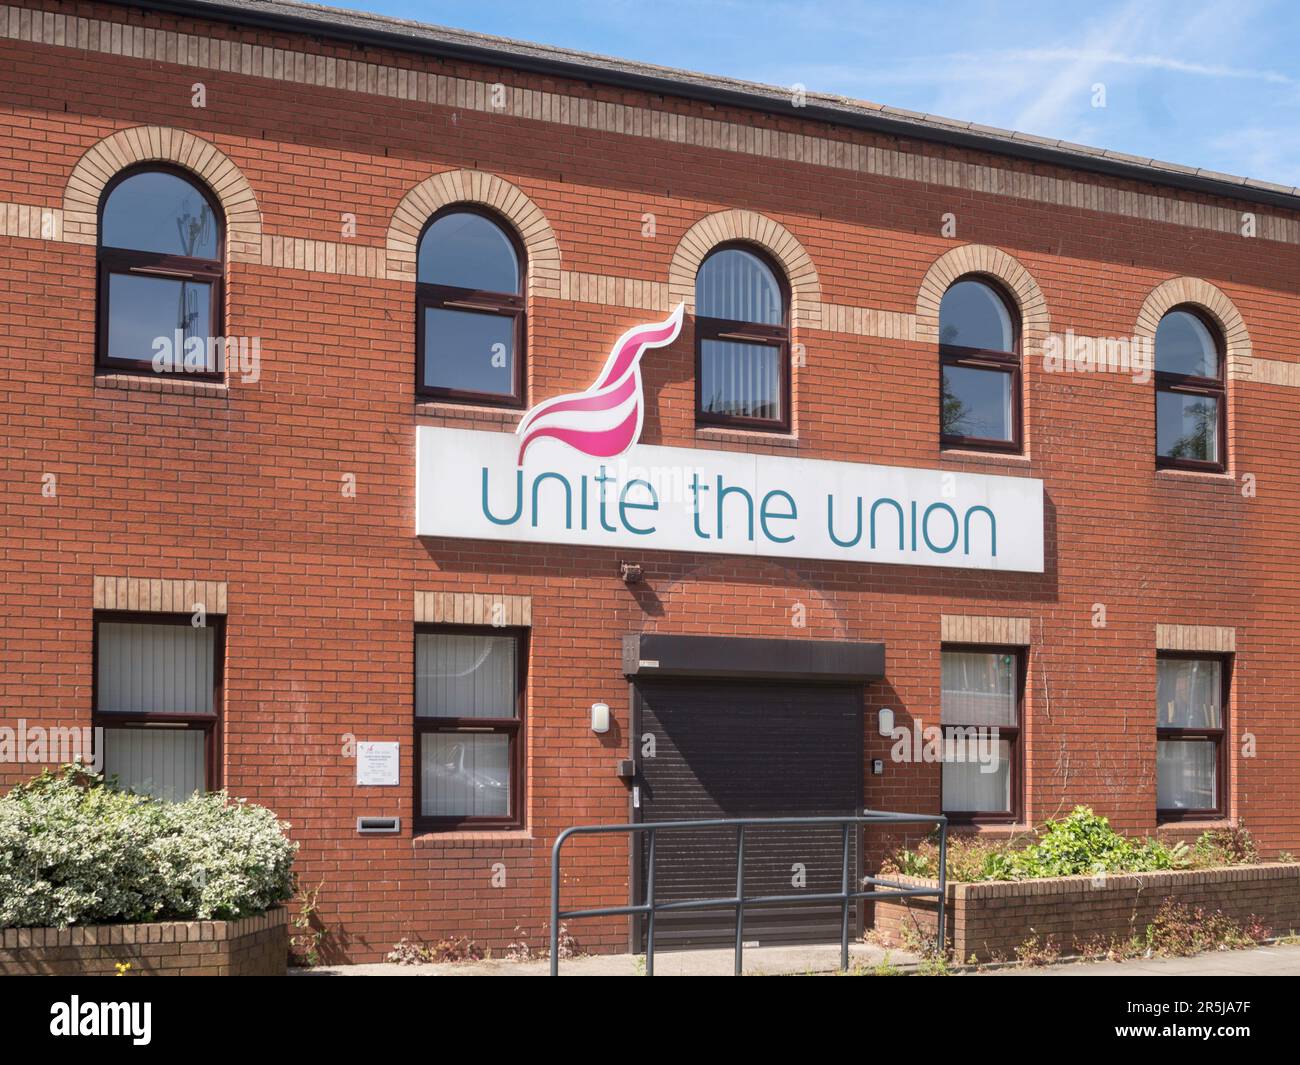 Unite The Union building in Wigan, Greater Manchester, England, UK Stock Photo